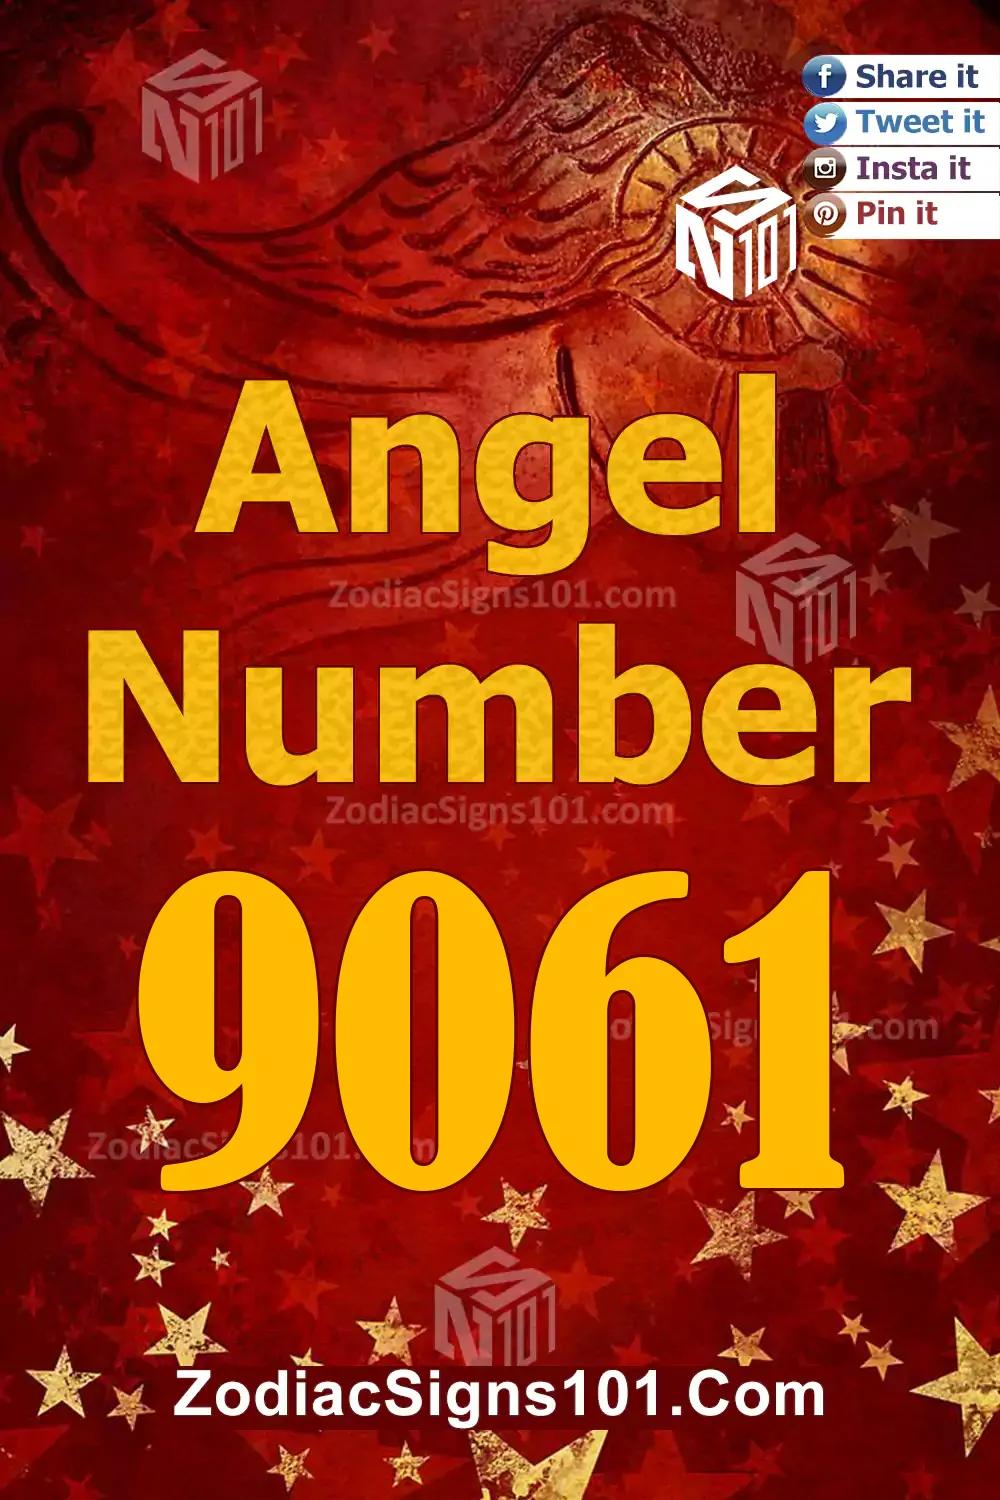 9061 Angel Number Meaning